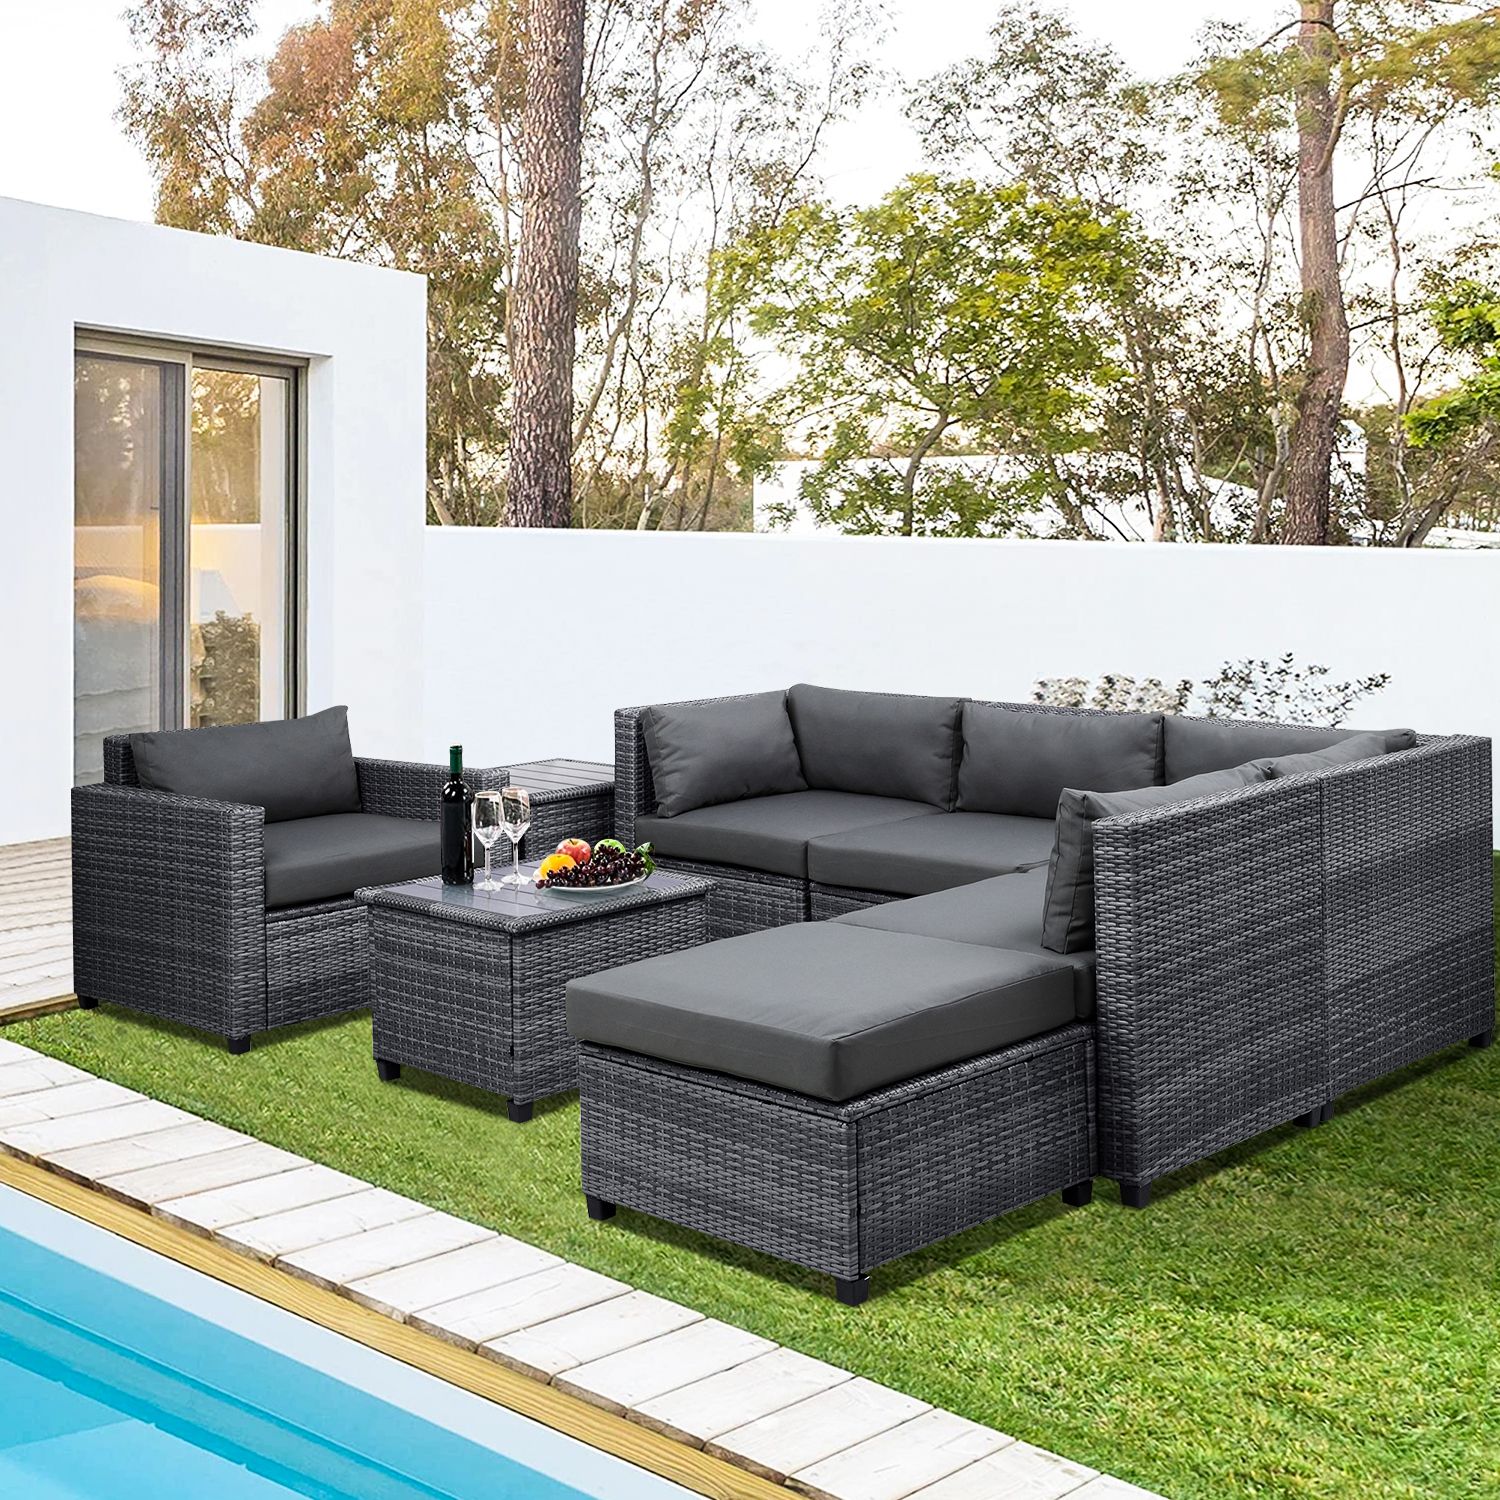 Sectional Patio Chairs & Seating Sofa Furniture For Living Room Outdoor Intended For Gray All Weather Outdoor Seating Patio Sets (View 8 of 15)